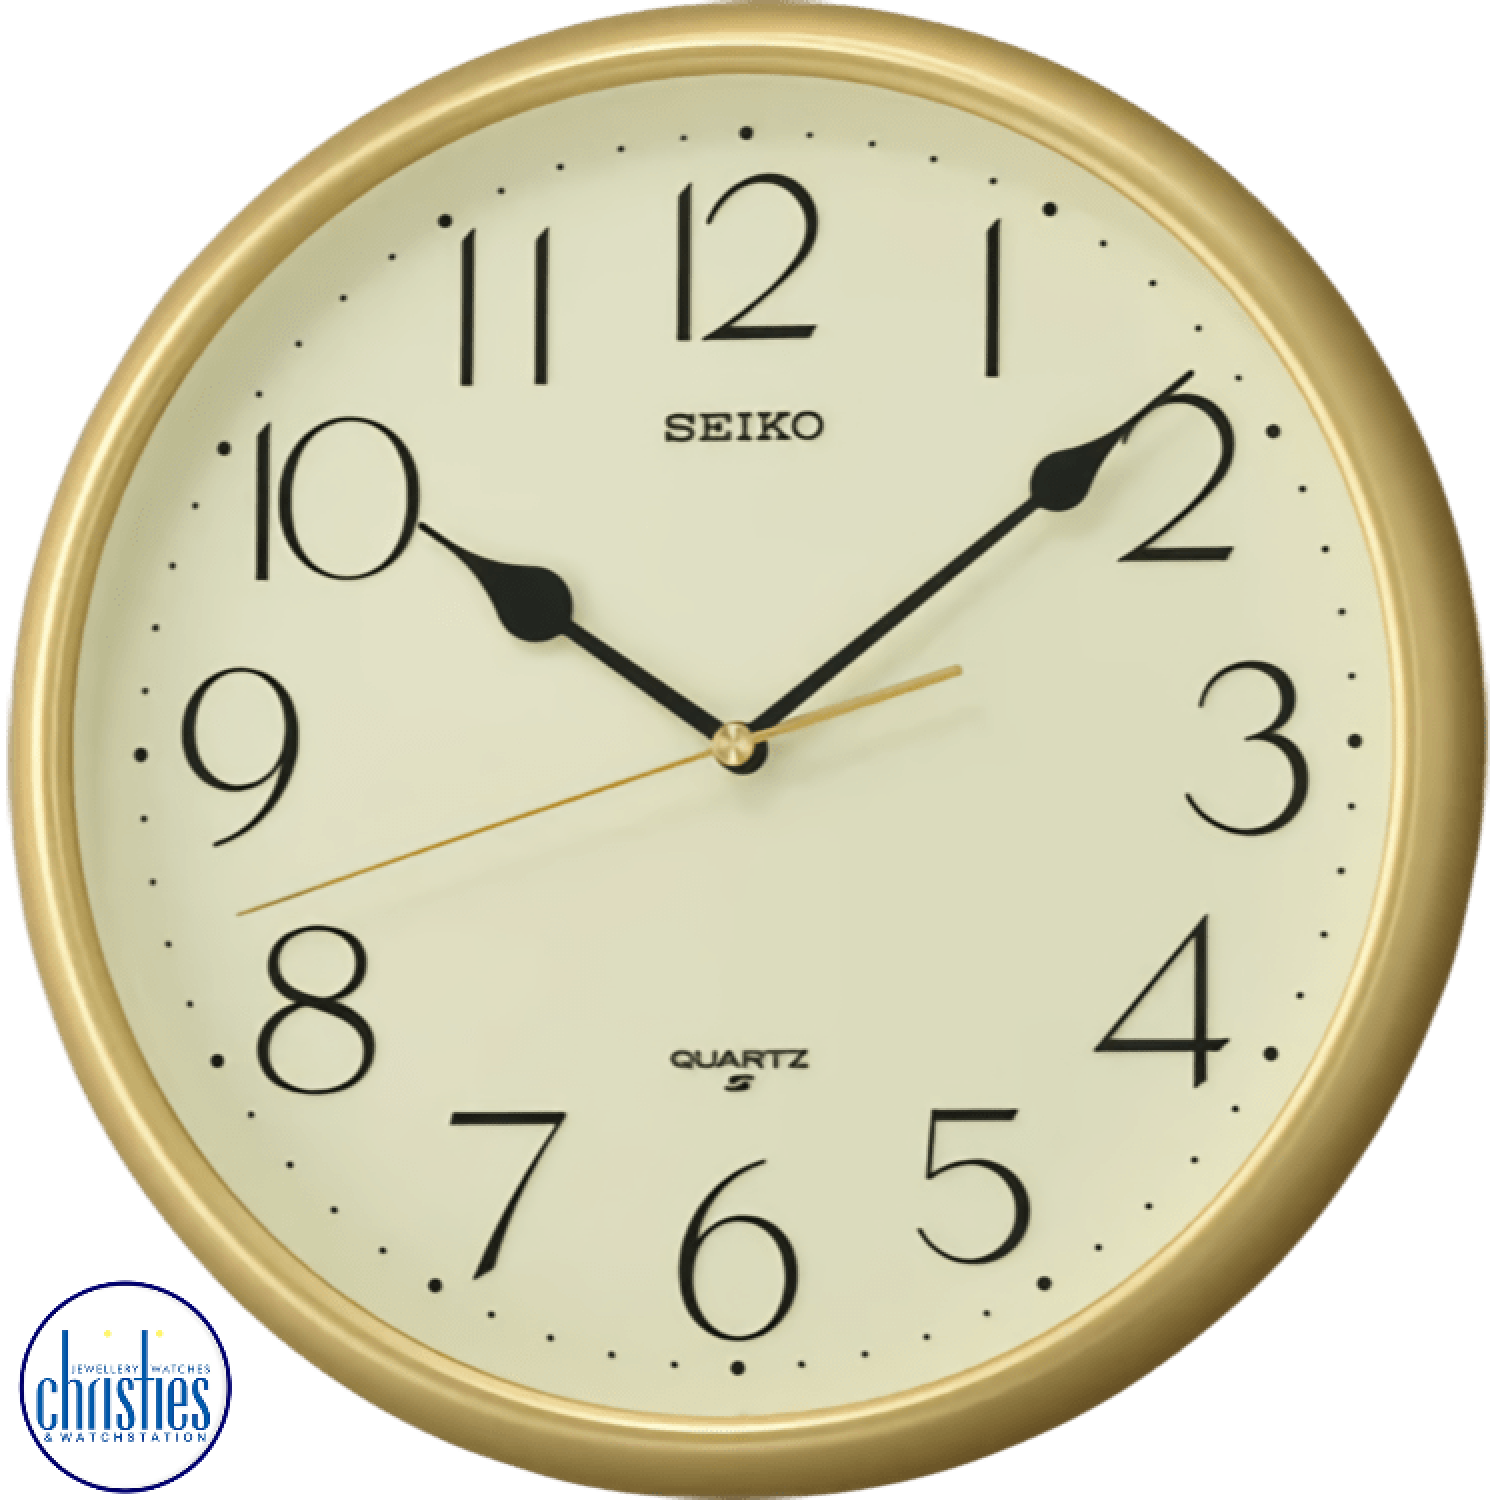 QXA747G Seiko Champagne  Analog Wall Clock. The Seiko Classic Gold Wall Clock QXA747G is an elegant and timeless timepiece that complements any interior decor.